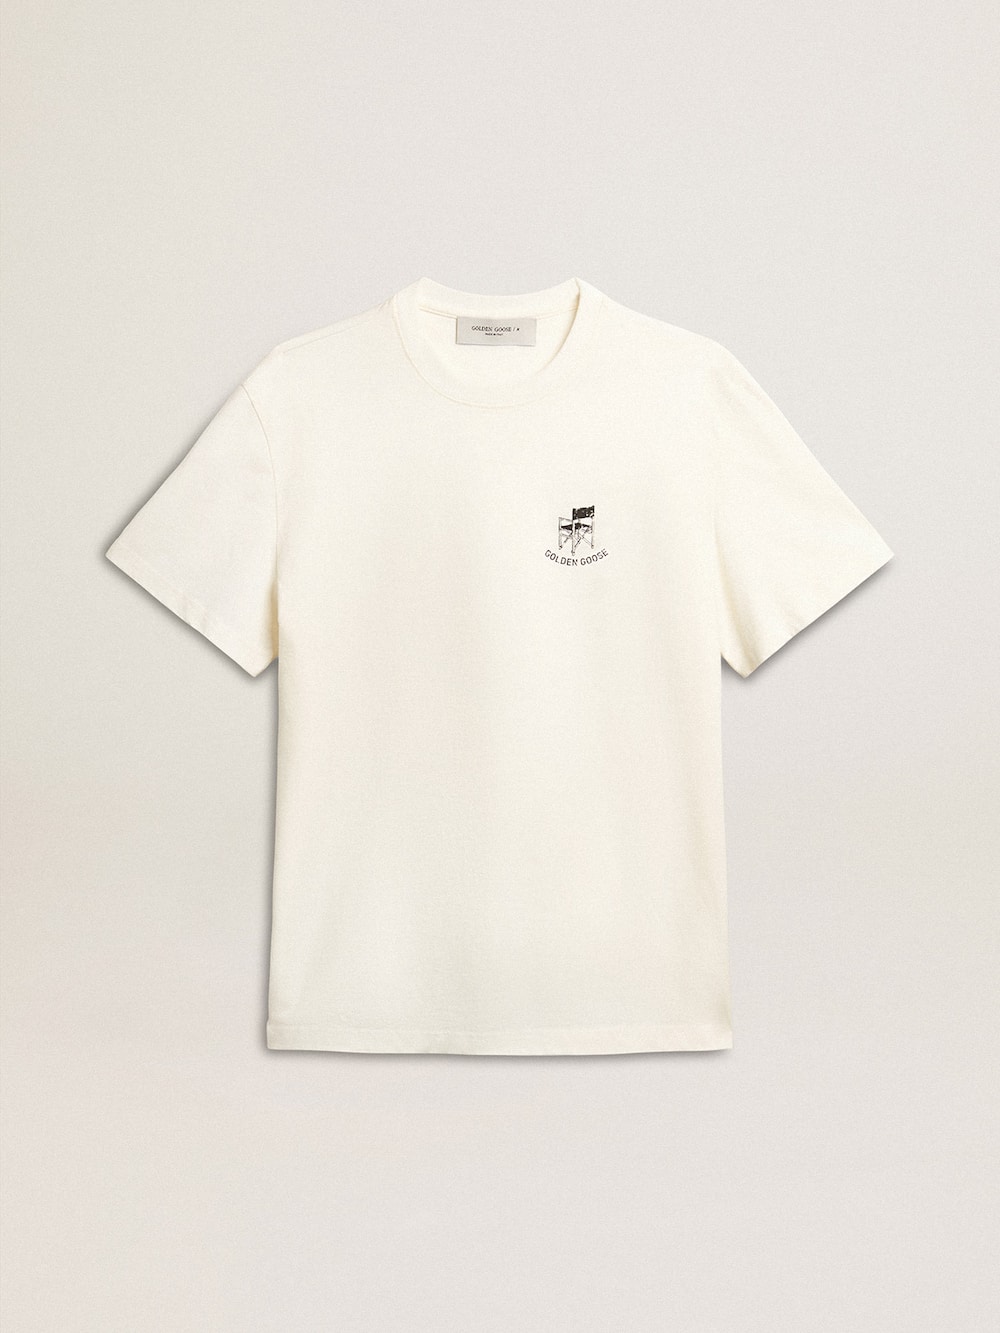 Golden Goose - White cotton T-shirt with seasonal logo print on the front in 